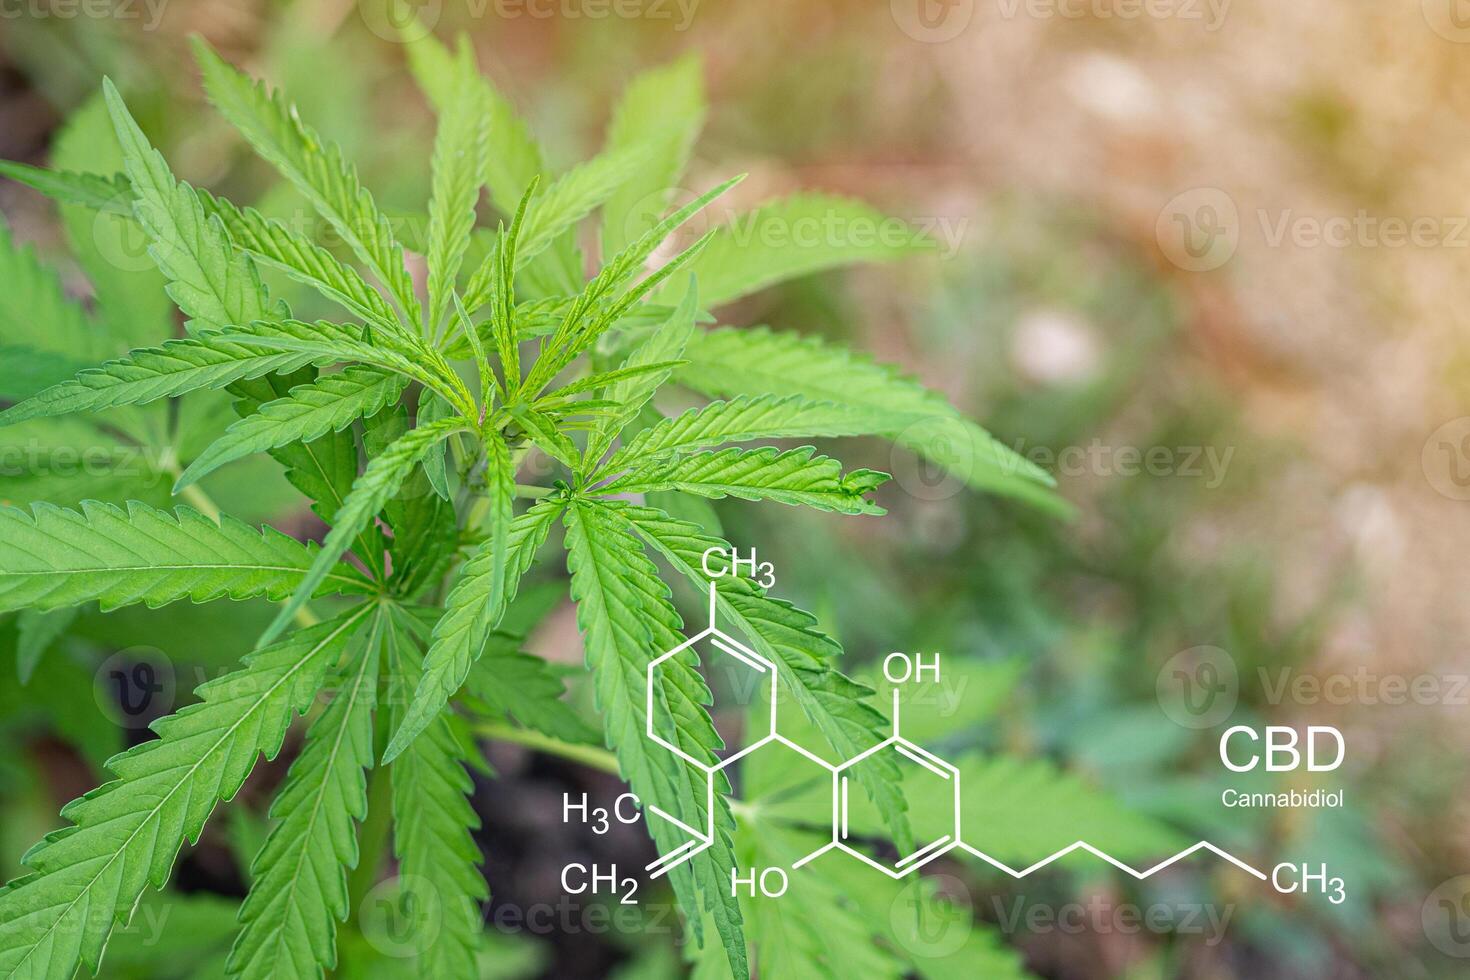 Cannabis plant growing at the outdoor farm. The texture of marijuana leaves with the image of the formula CBD. photo